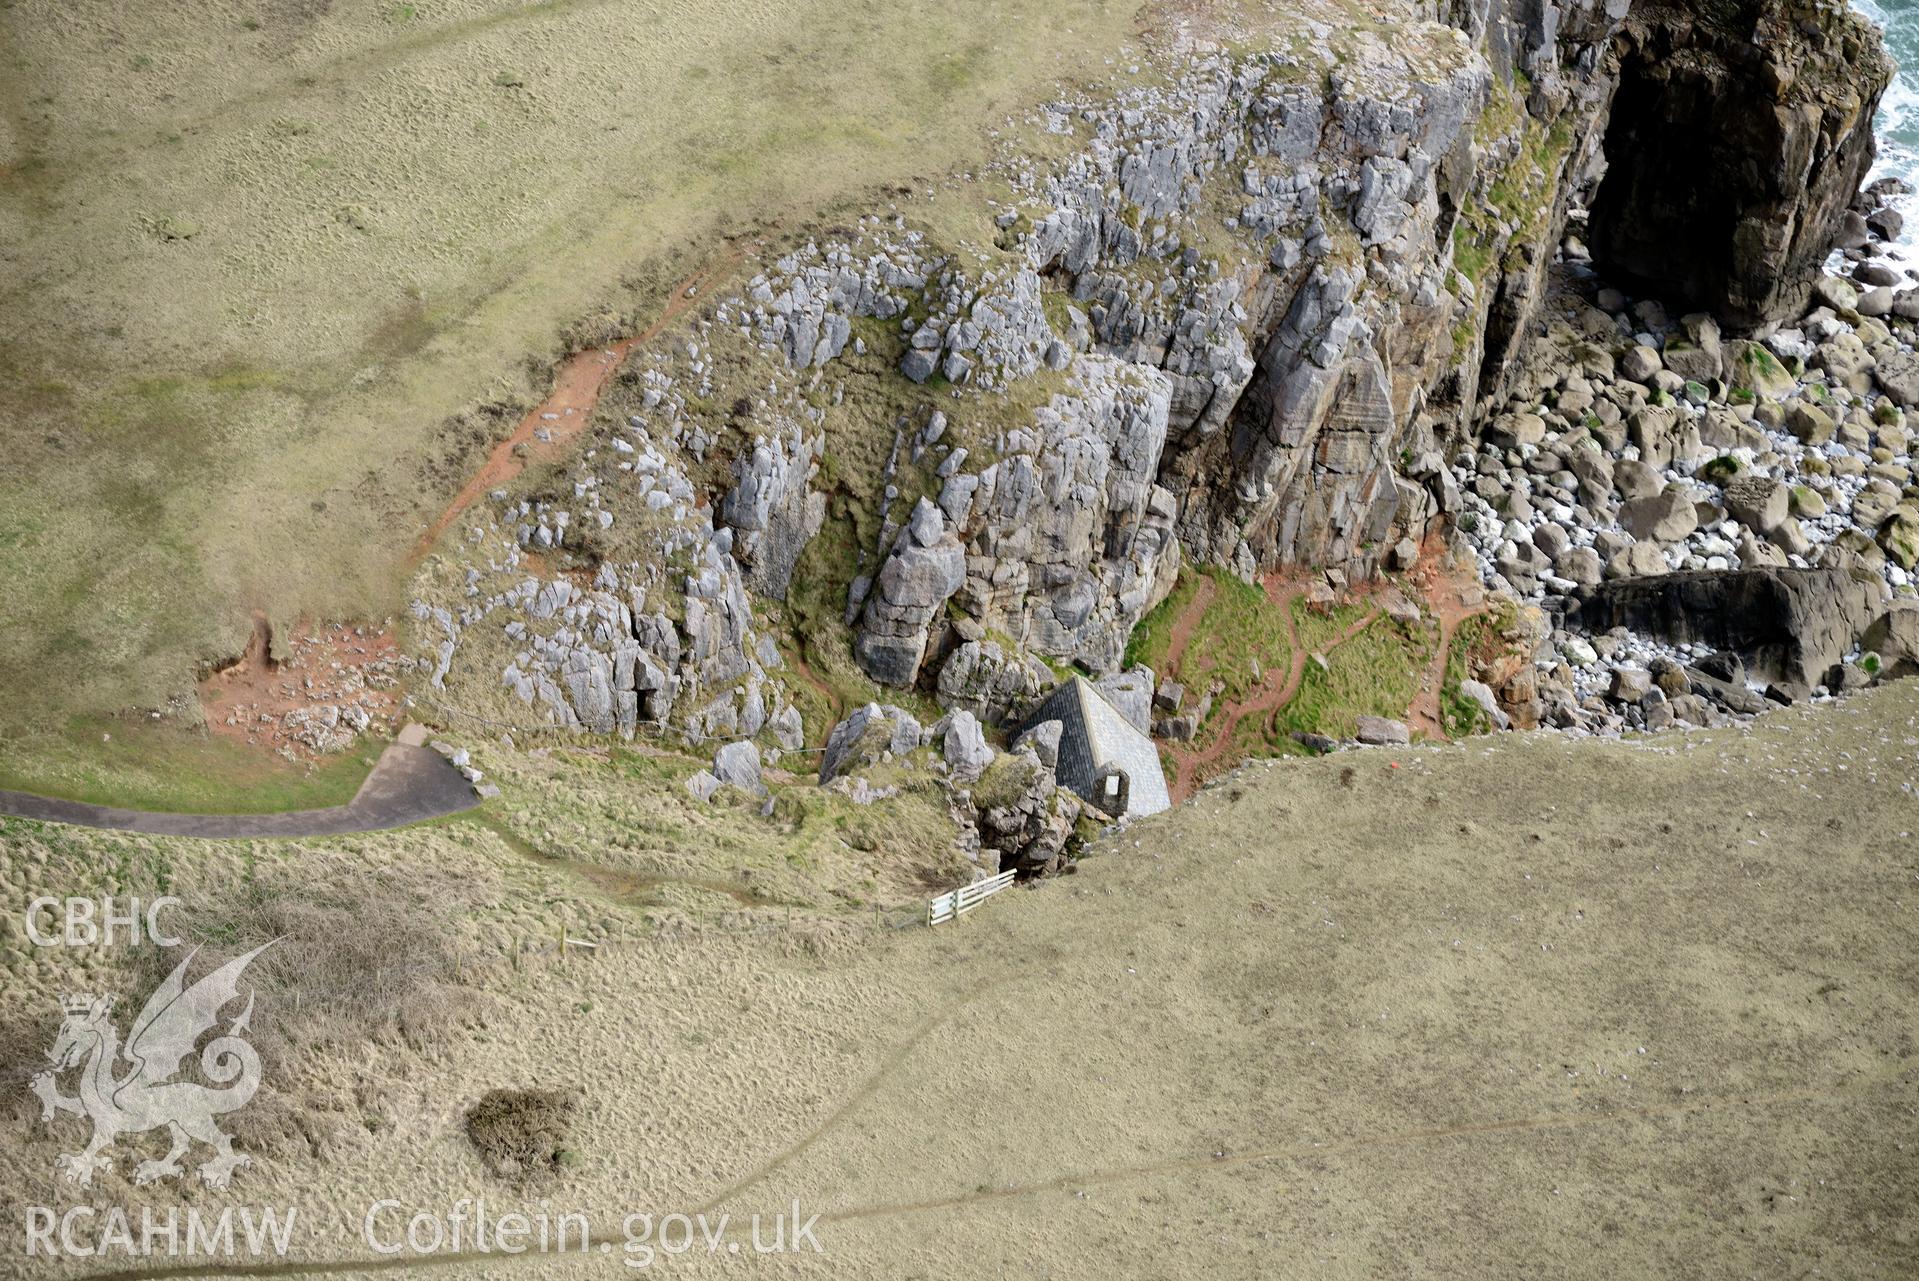 St Govan's Chapel. Baseline aerial reconnaissance survey for the CHERISH Project. ? Crown: CHERISH PROJECT 2018. Produced with EU funds through the Ireland Wales Co-operation Programme 2014-2020. All material made freely available through the Open Government Licence.